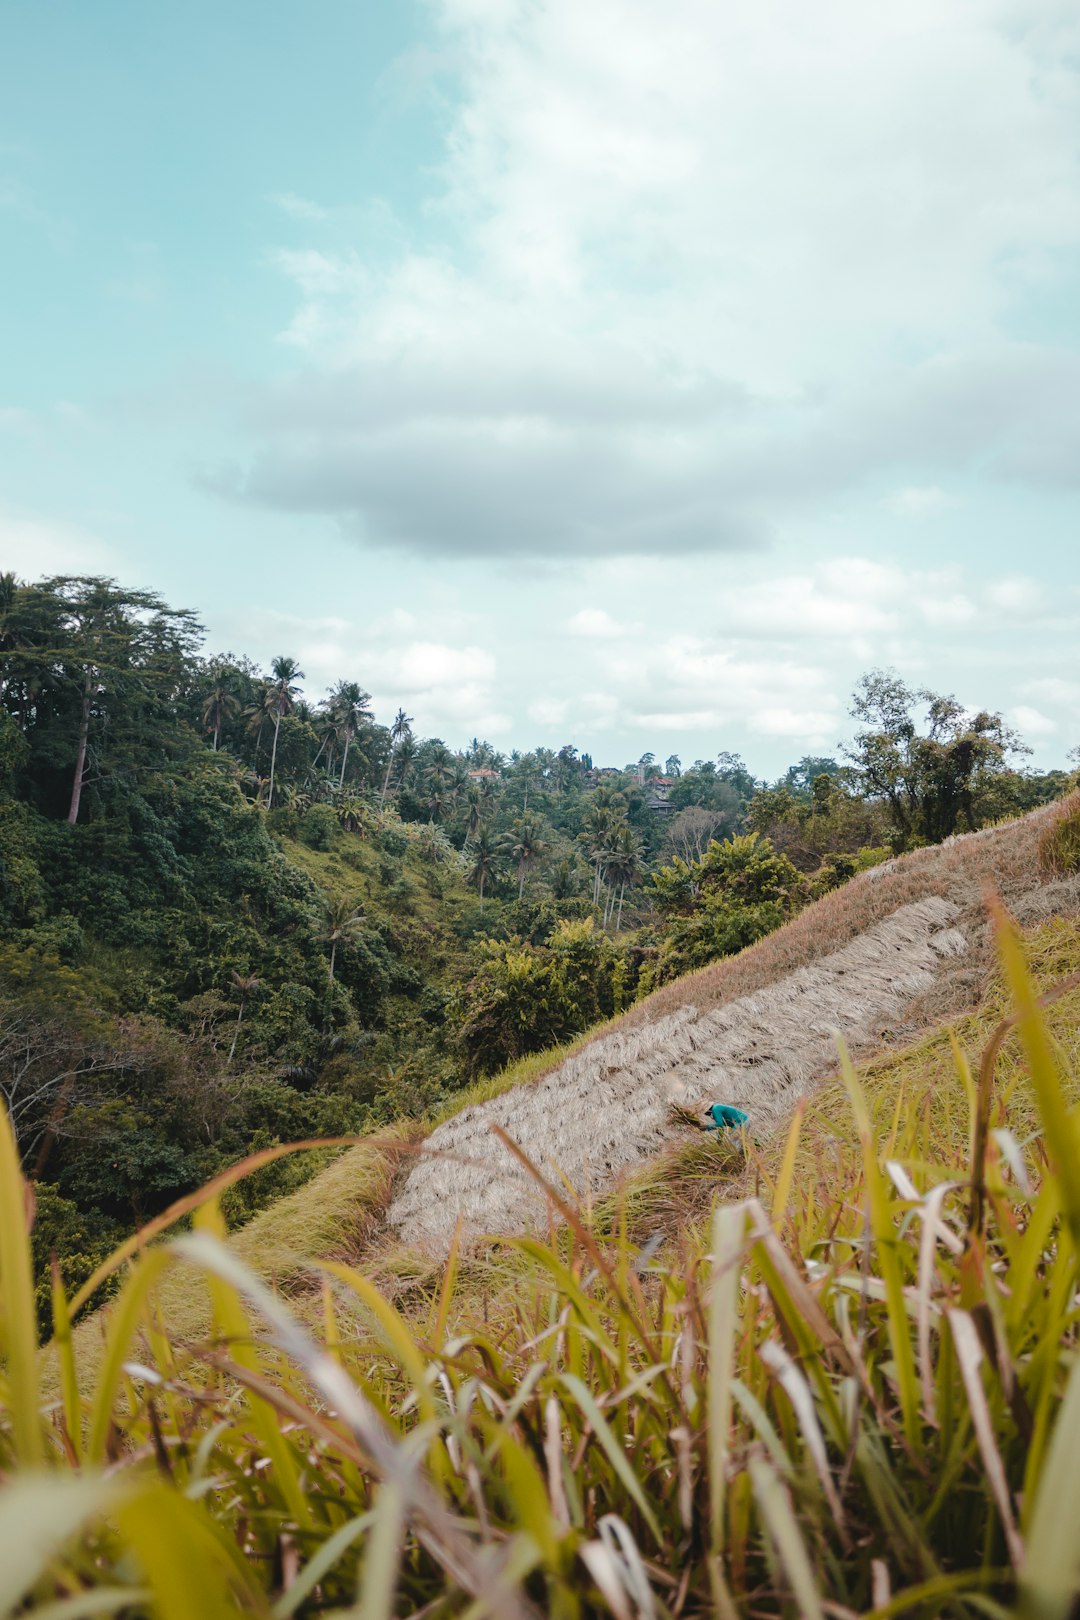 travelers stories about Hill in Ubud, Indonesia